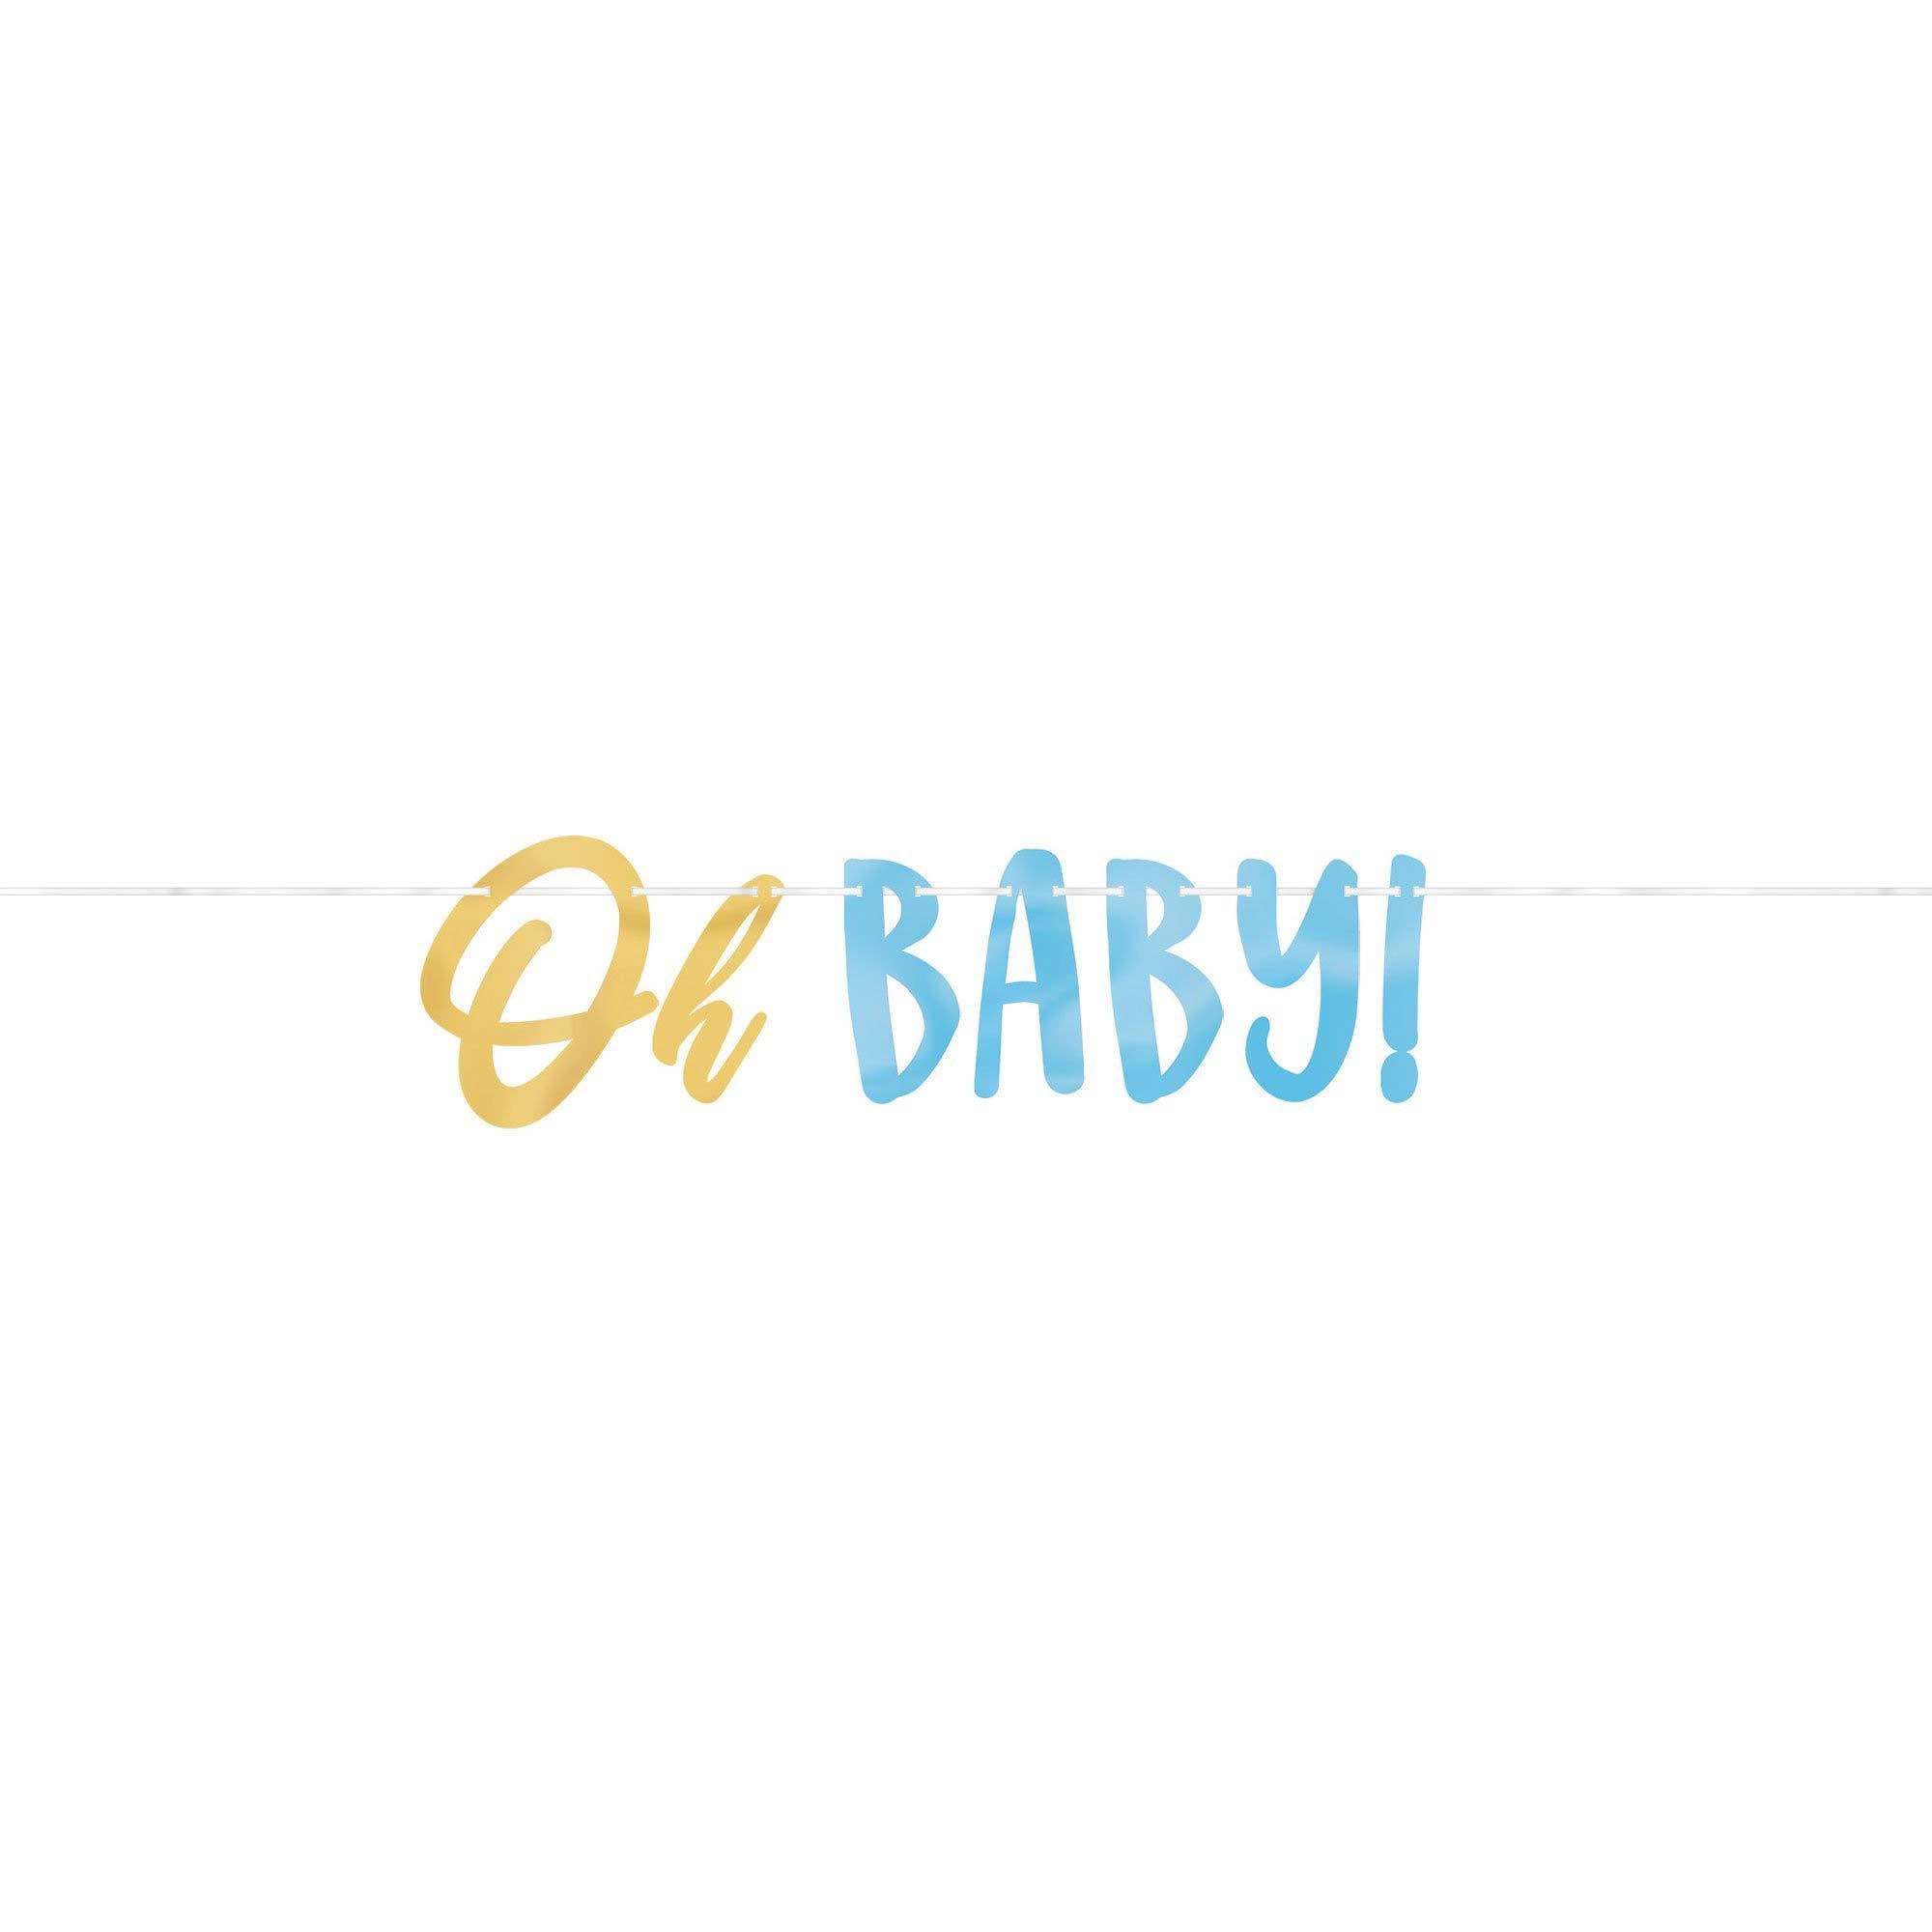 Oh Baby Boy Letter Banner 12ft x 7 1/4in Decorations - Party Centre